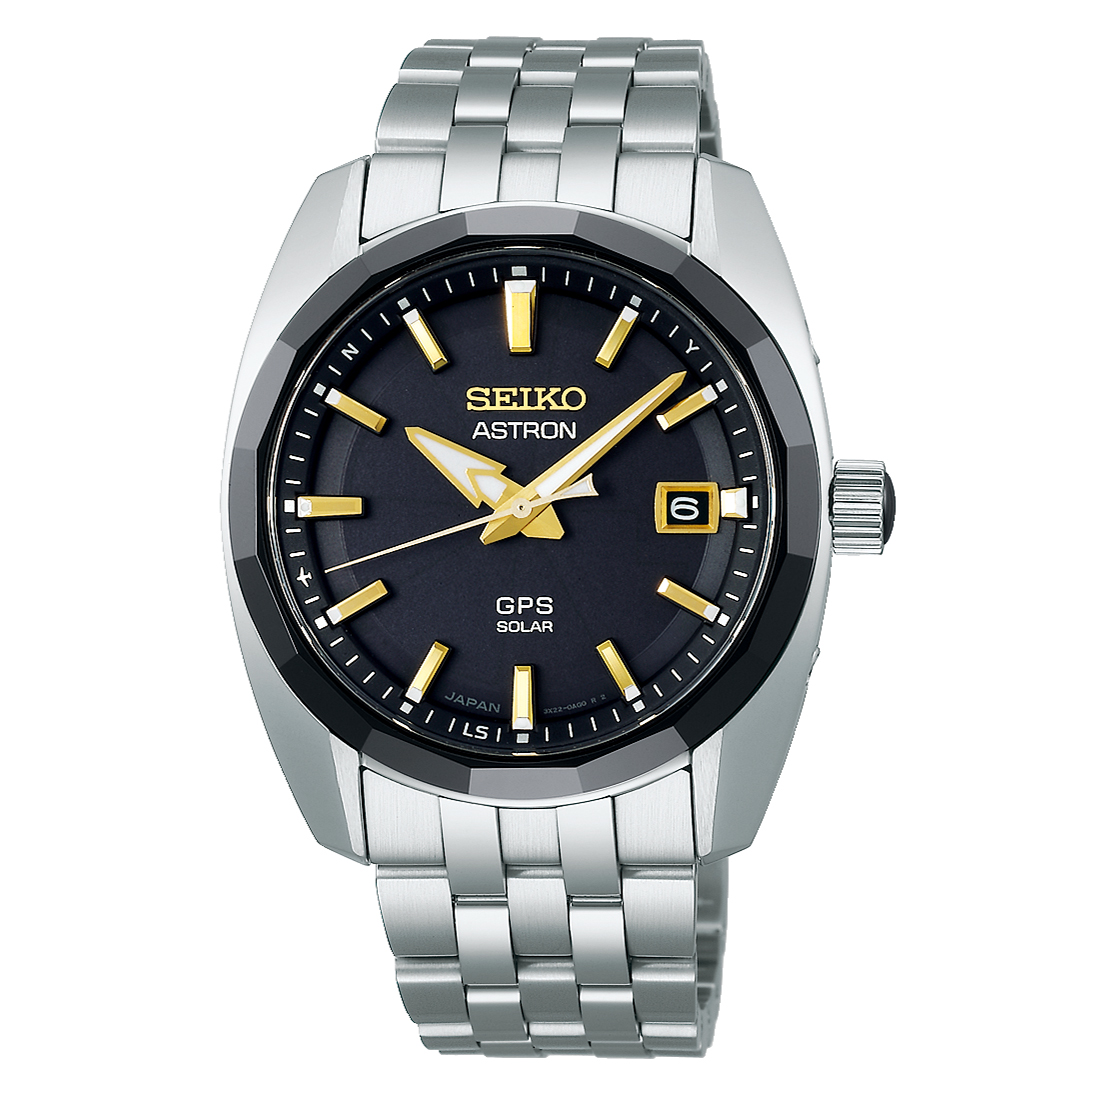 Astron GPS Solar | Seiko Boutique | The Official UK Online Store